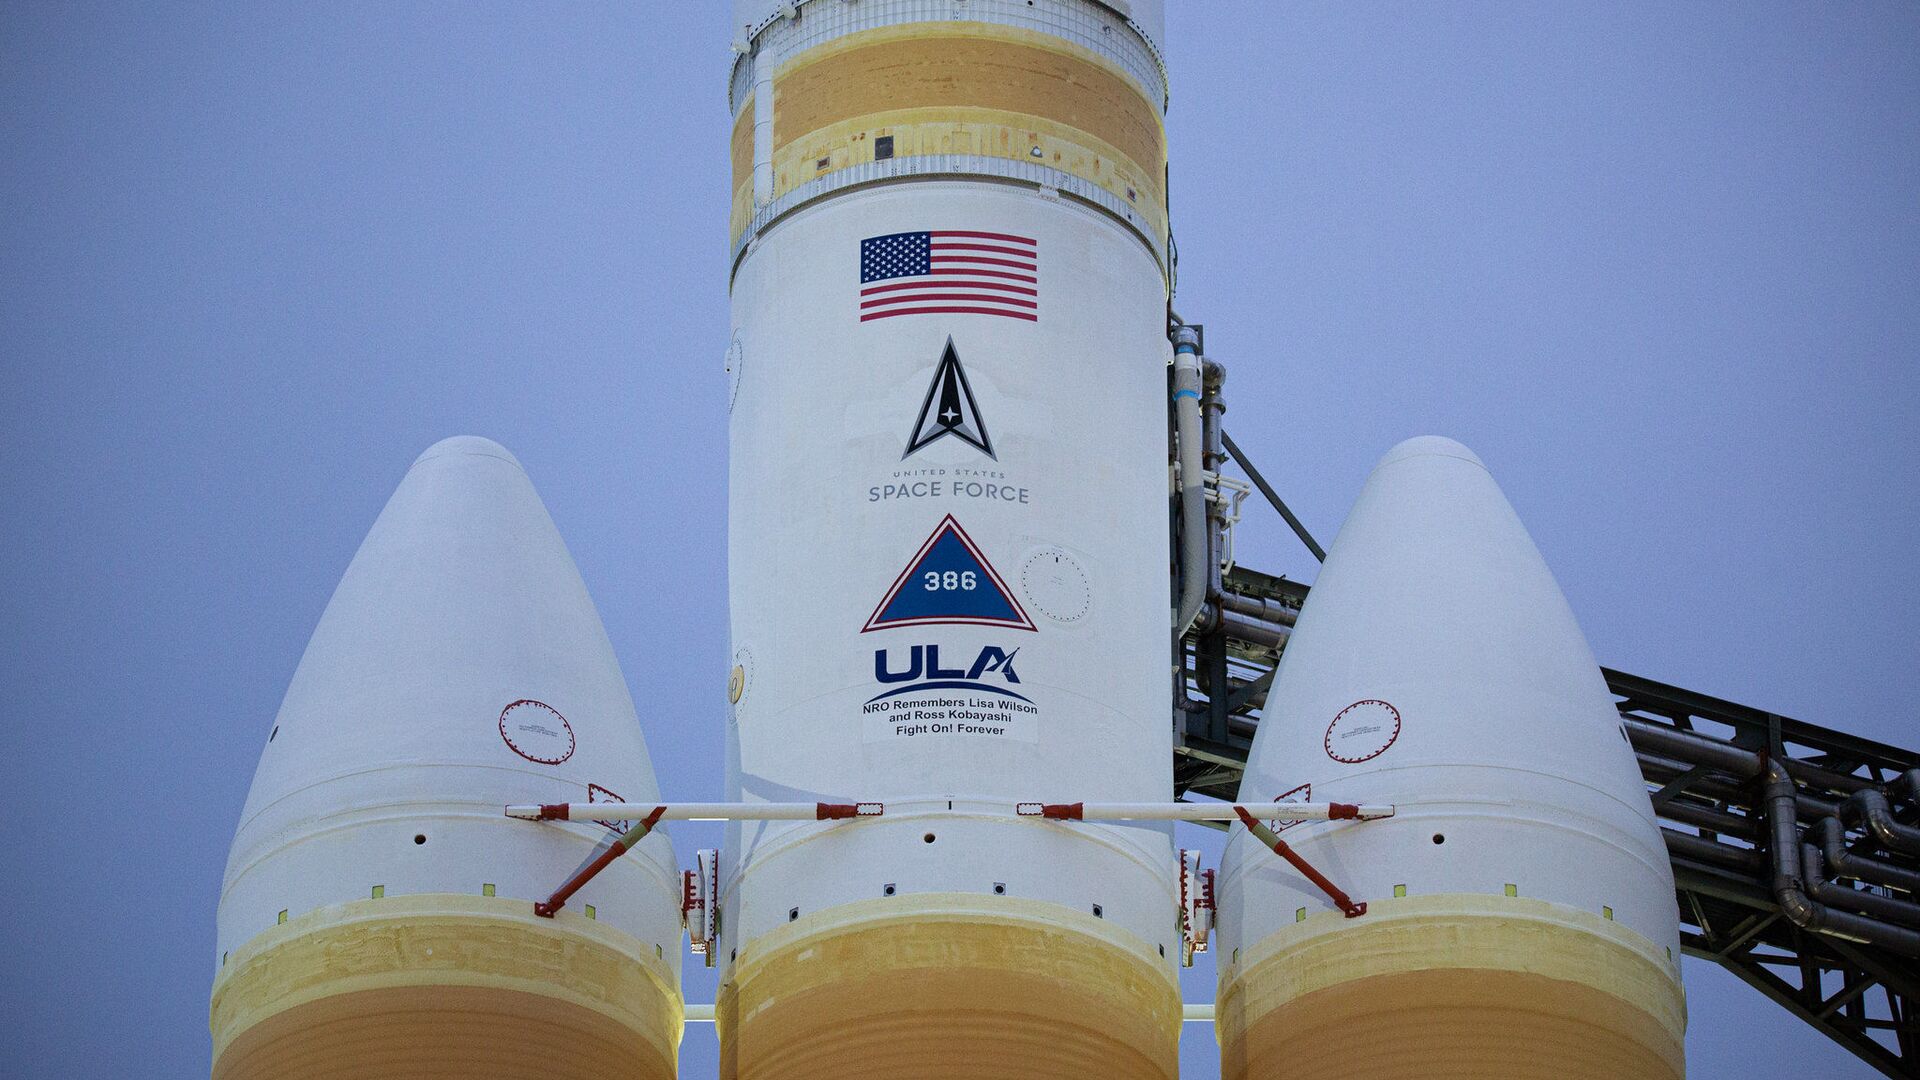 Delta IV heavy rocket successfully propelled a US spy satellite into space from Vandenberg Air Force Base in California, the United Launch Alliance announced. - Sputnik International, 1920, 17.07.2021